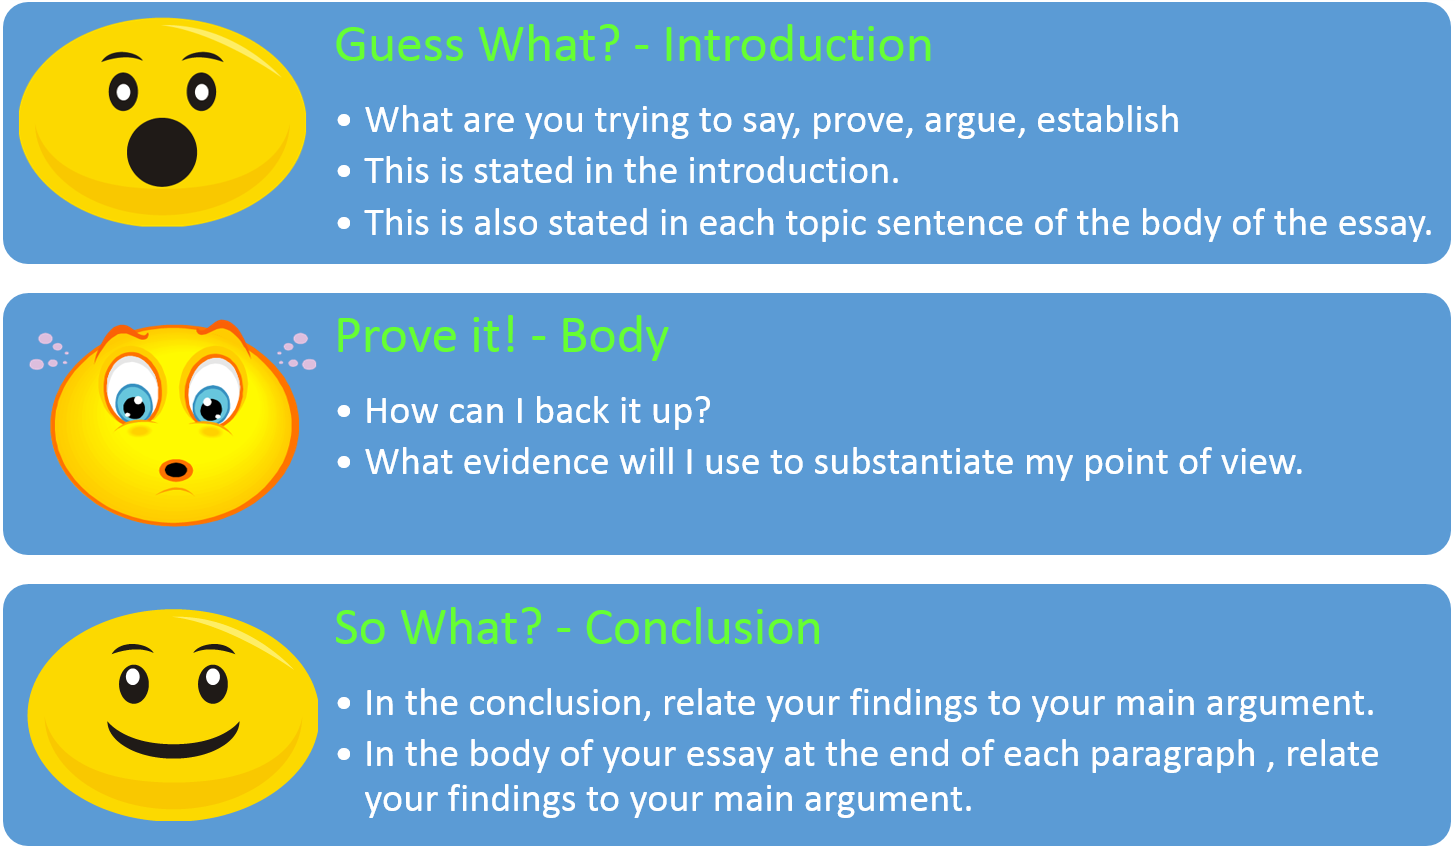 How to Write an Essay Introduction - TOP Rules